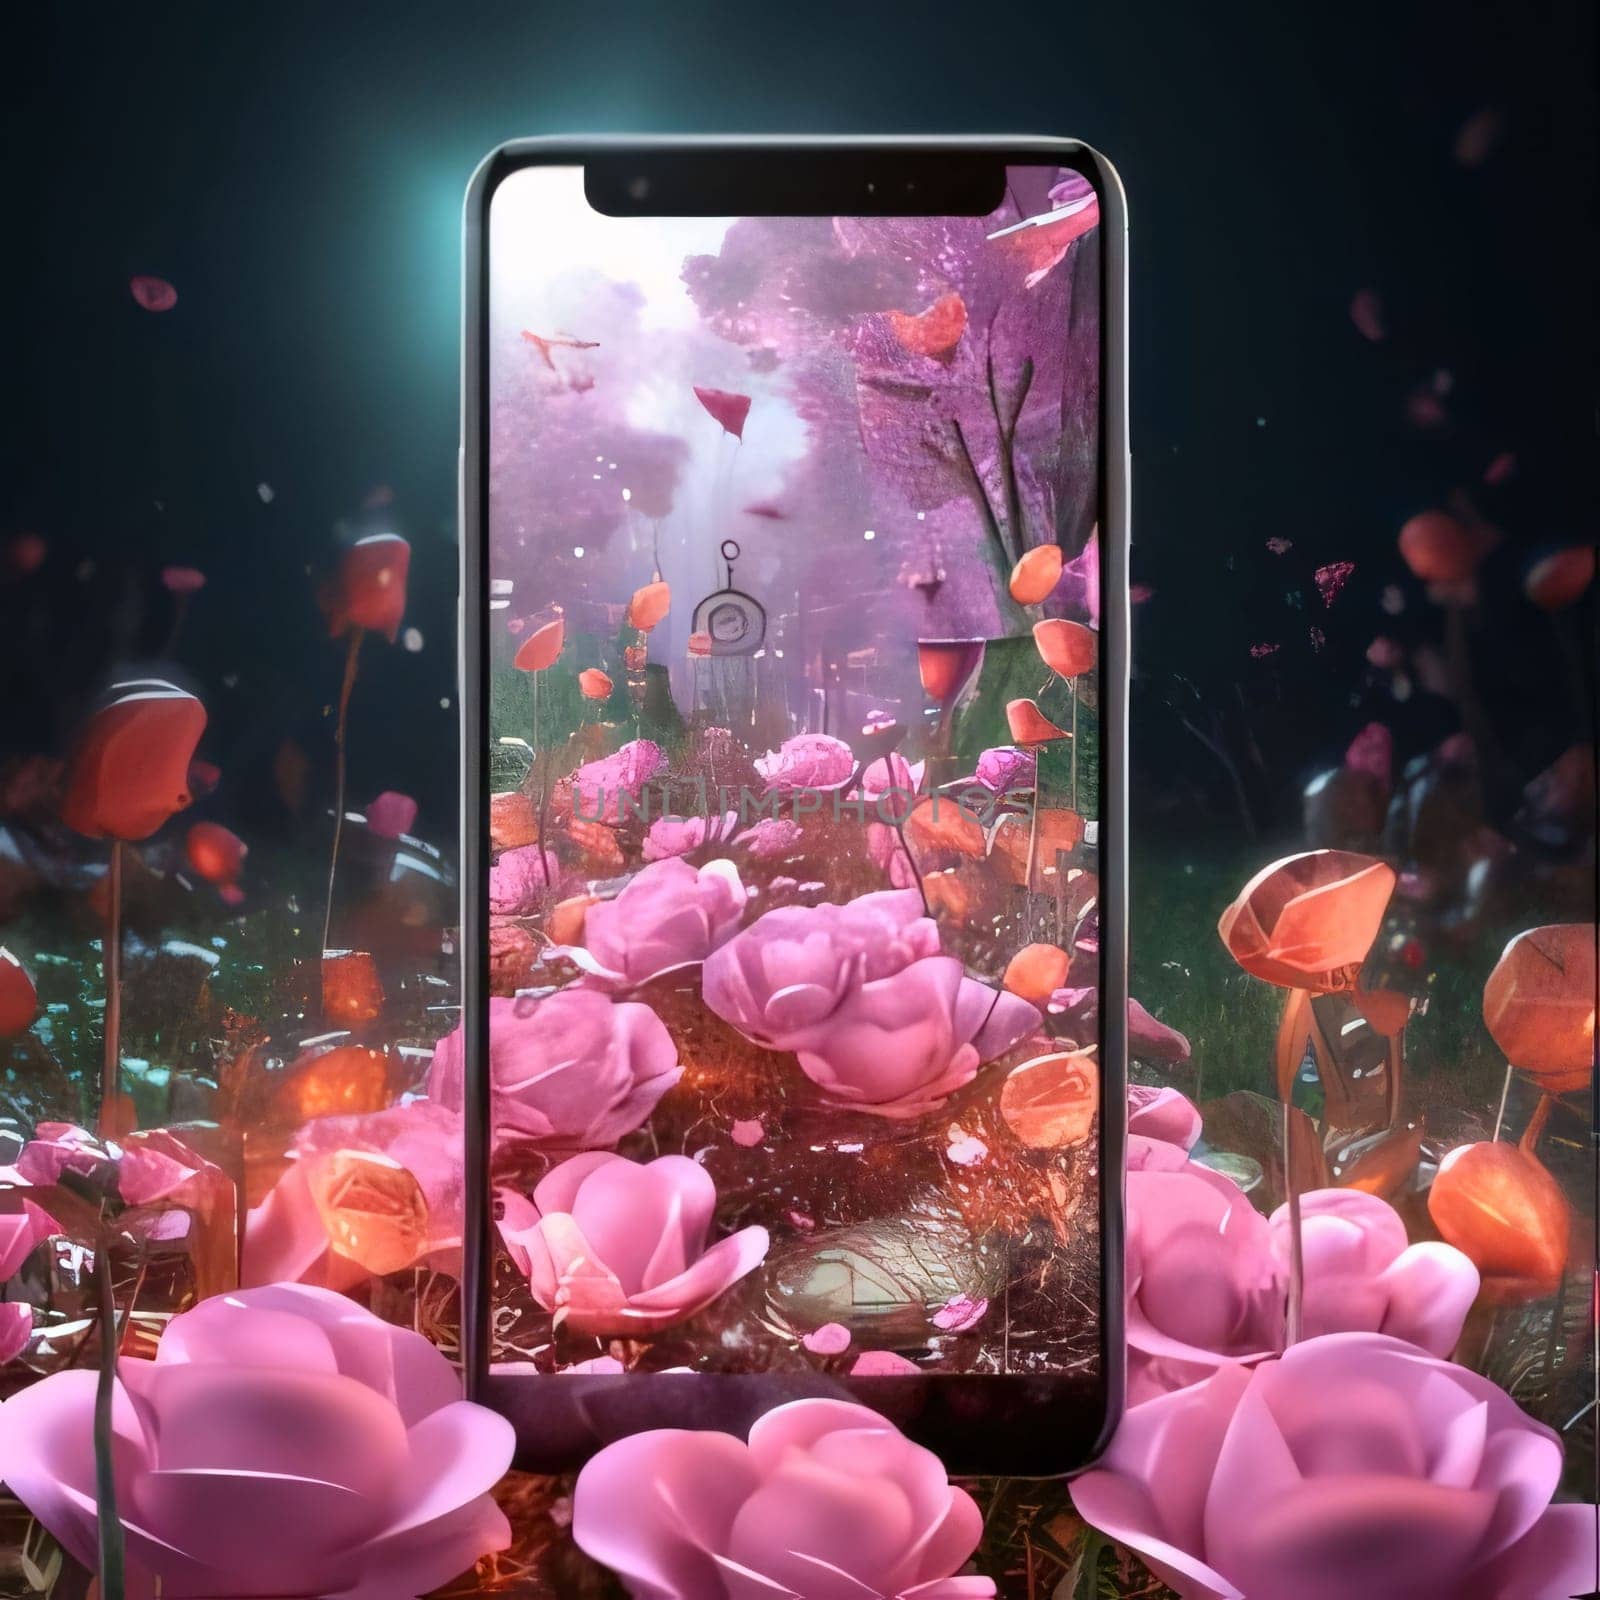 Fields on red and pink flowers. Smartphone screen with camera on. Flowering flowers, a symbol of spring, new life. A joyful time of nature waking up to life.